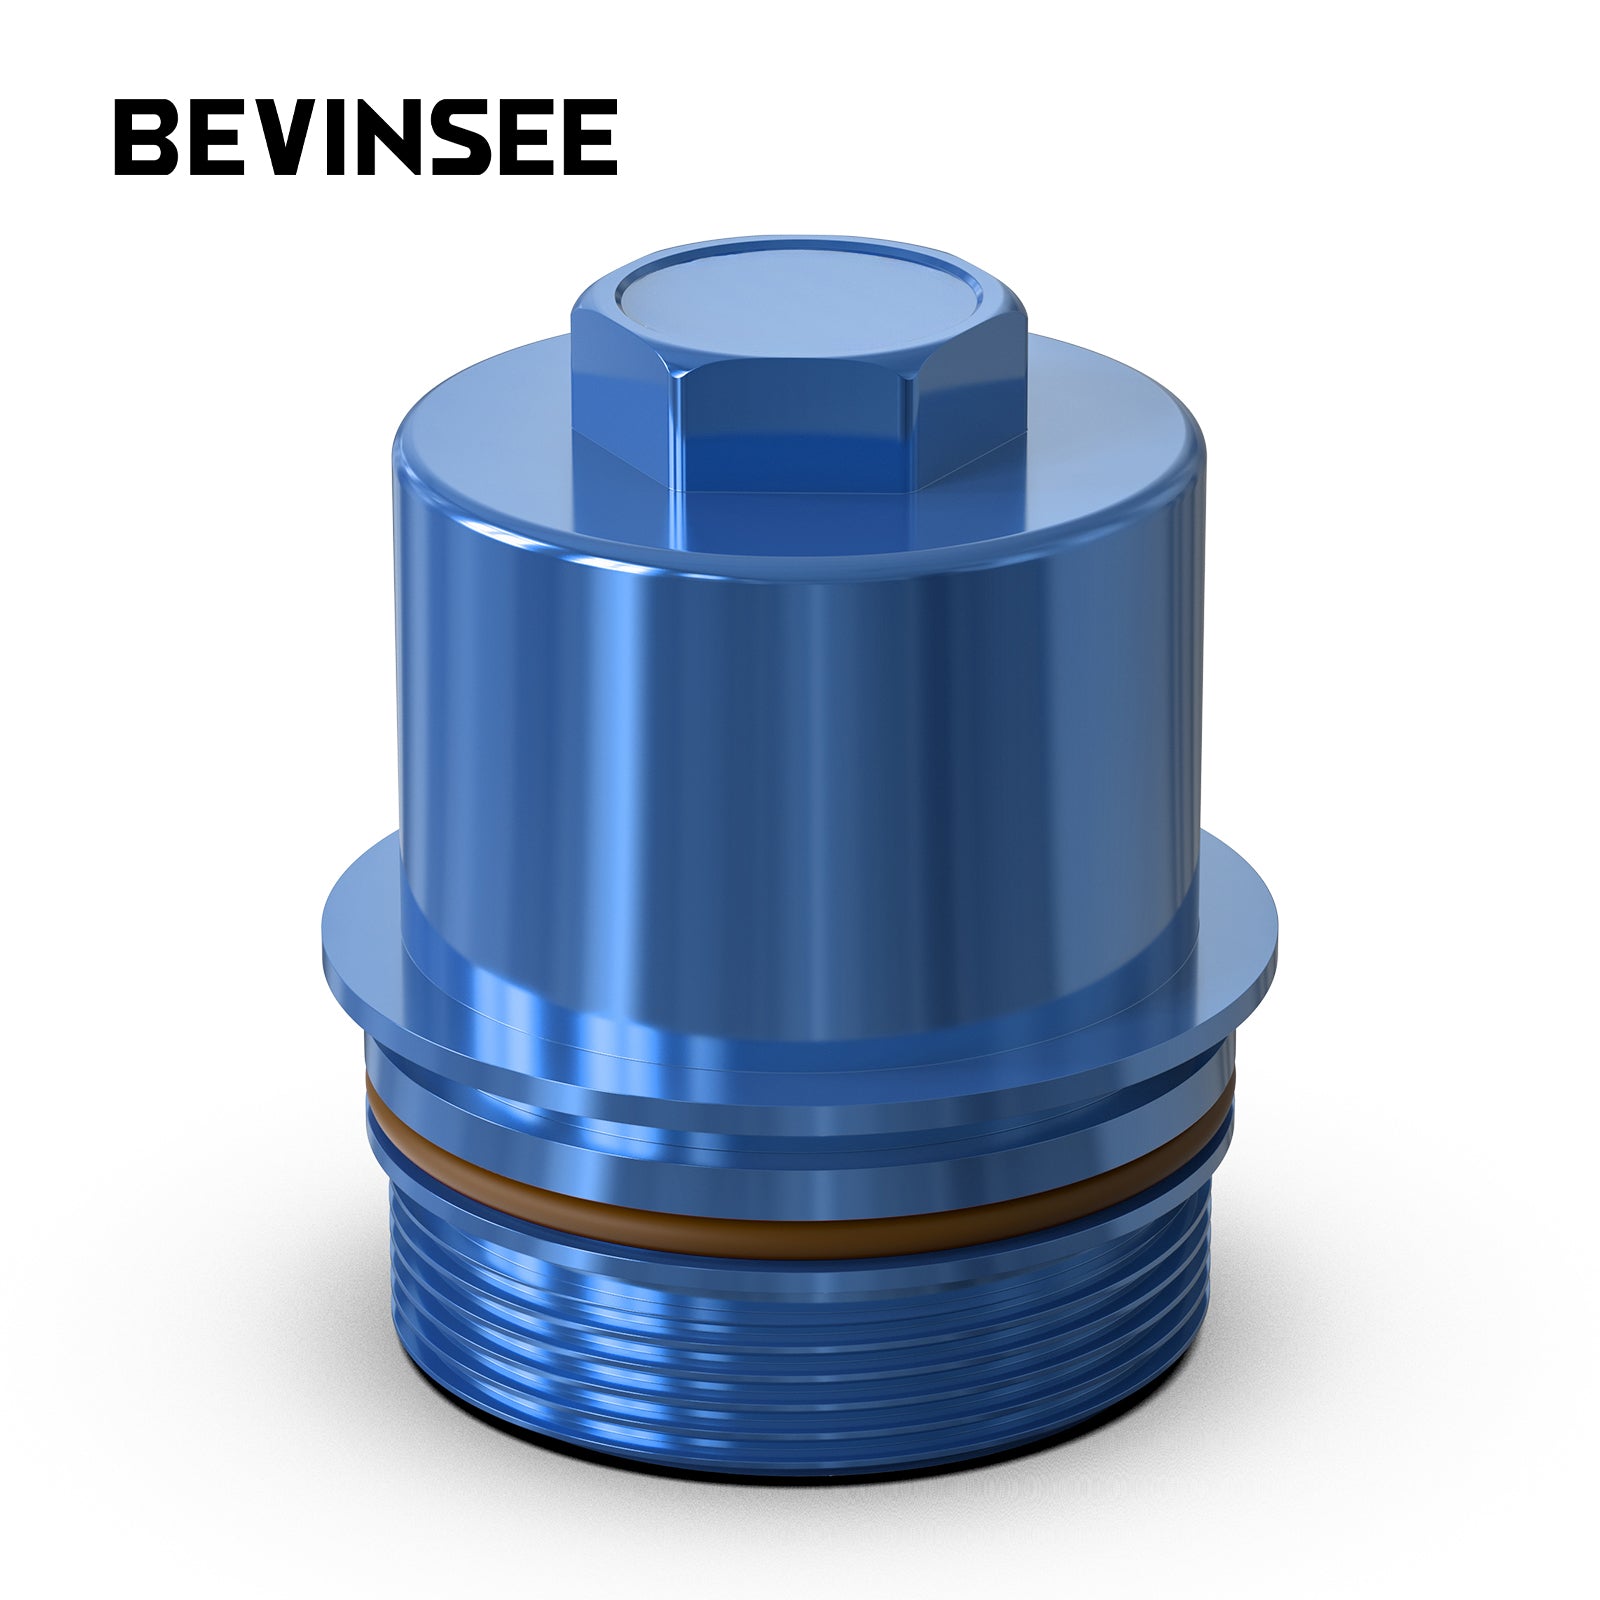 BEVINSEE Oil Filter Housing Cap with Seal O-ring 11428583895 For BMW B58 F20 F30 G20 F32 G05 G01 340i M140i M240i 2017+